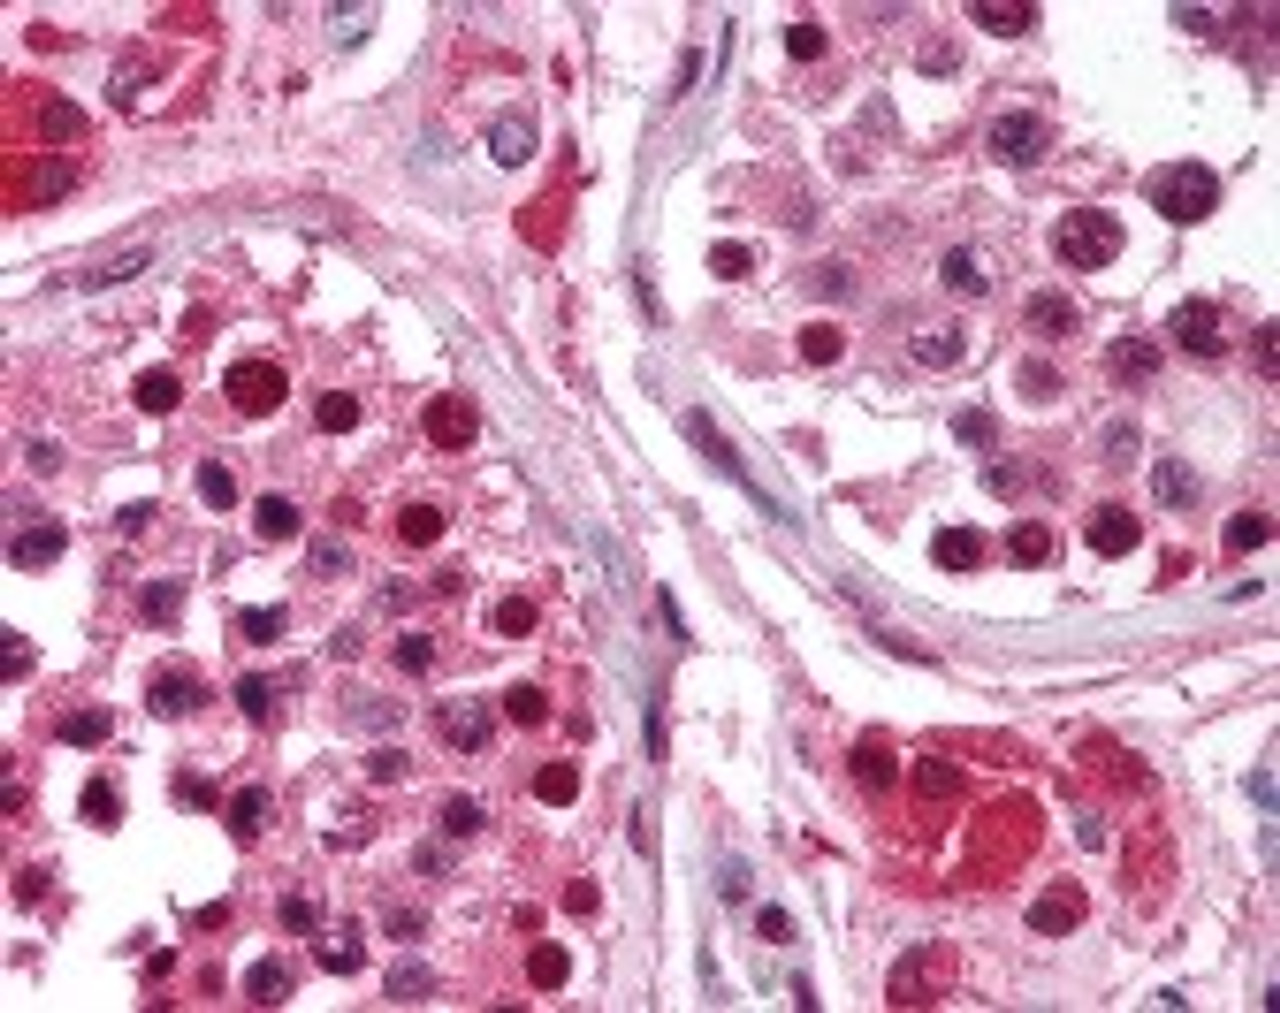 Immunohistochemistry staining of Replication Protein A3 in testis tissue using Replication Protein A3 monoclonal Antibody.